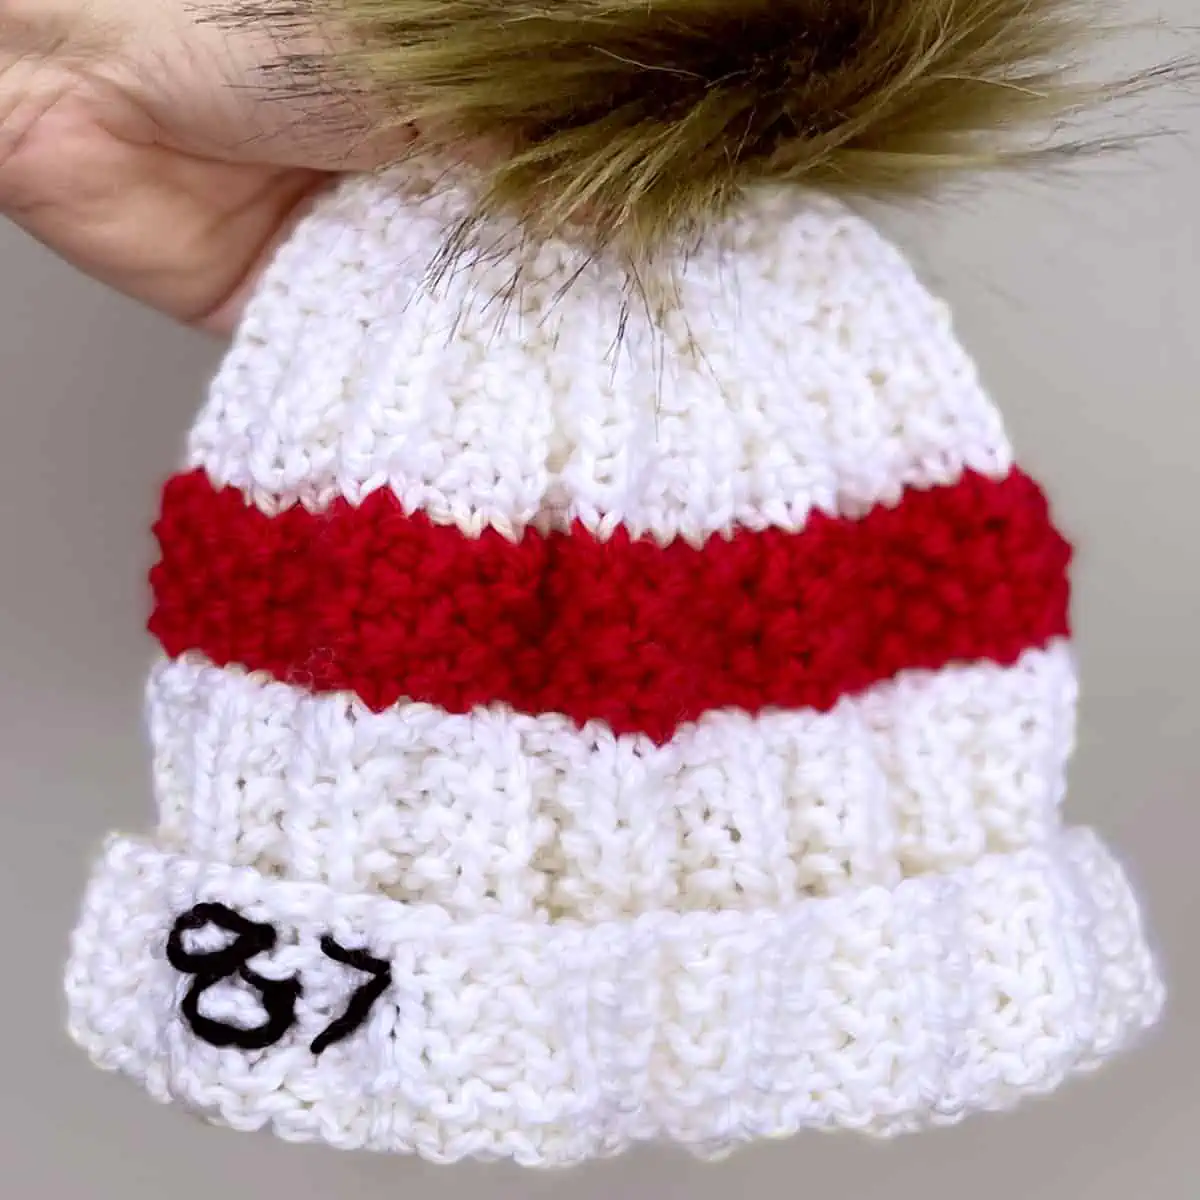 White and red knitted Taylor Swift's 87 Beanie Hat held by a hand.